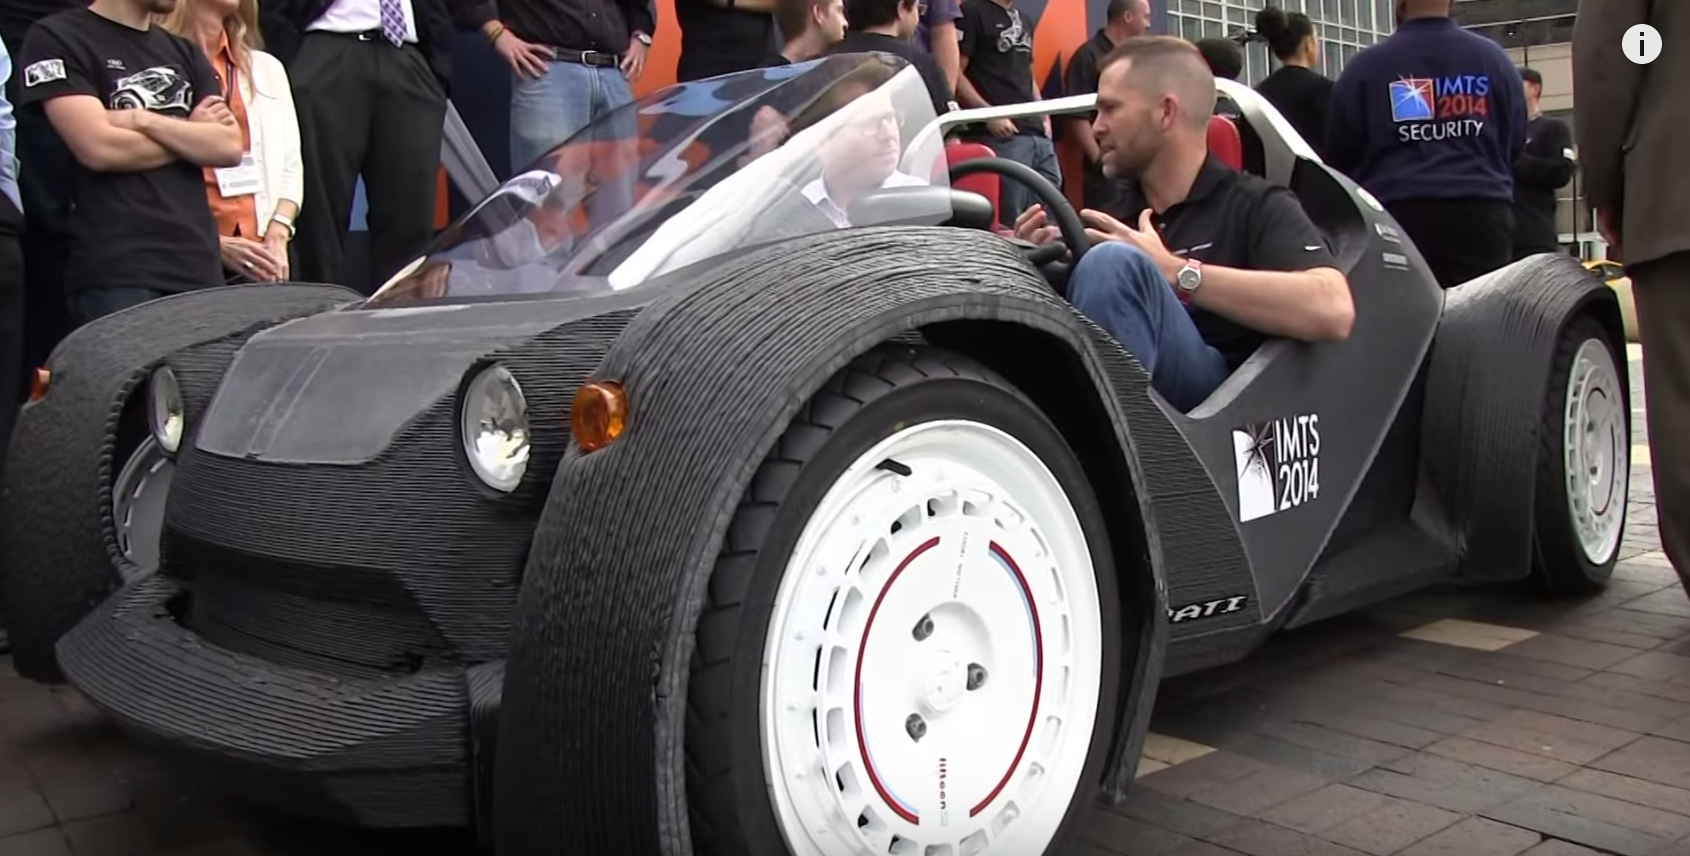 Strati The first 3D printed car. YES, we go for a ride! A new EV IMTS 2014